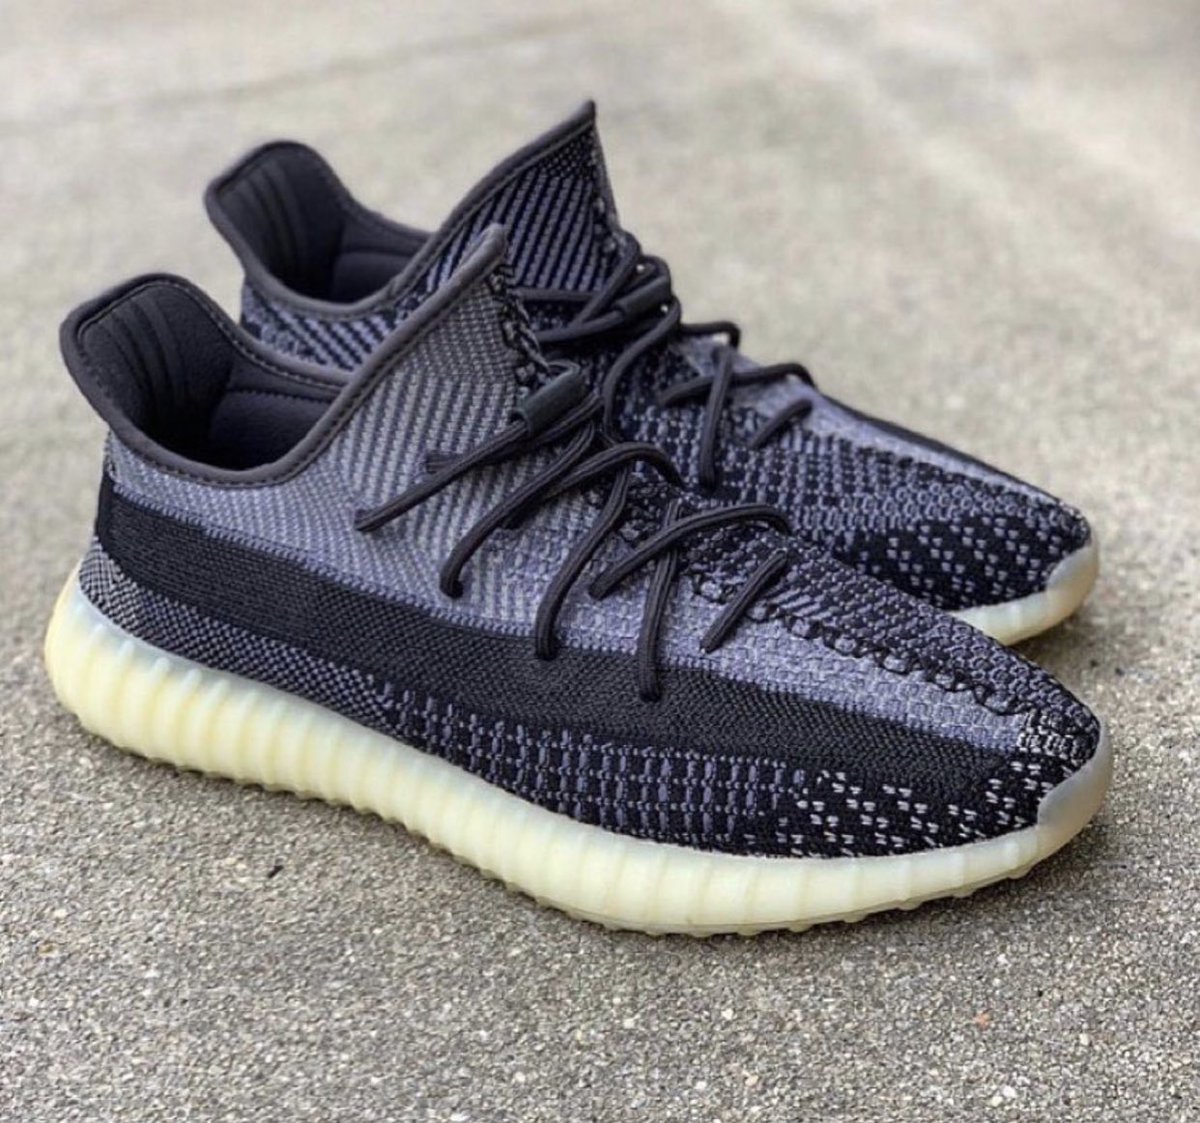 yeezy 350 boost v2 carbon